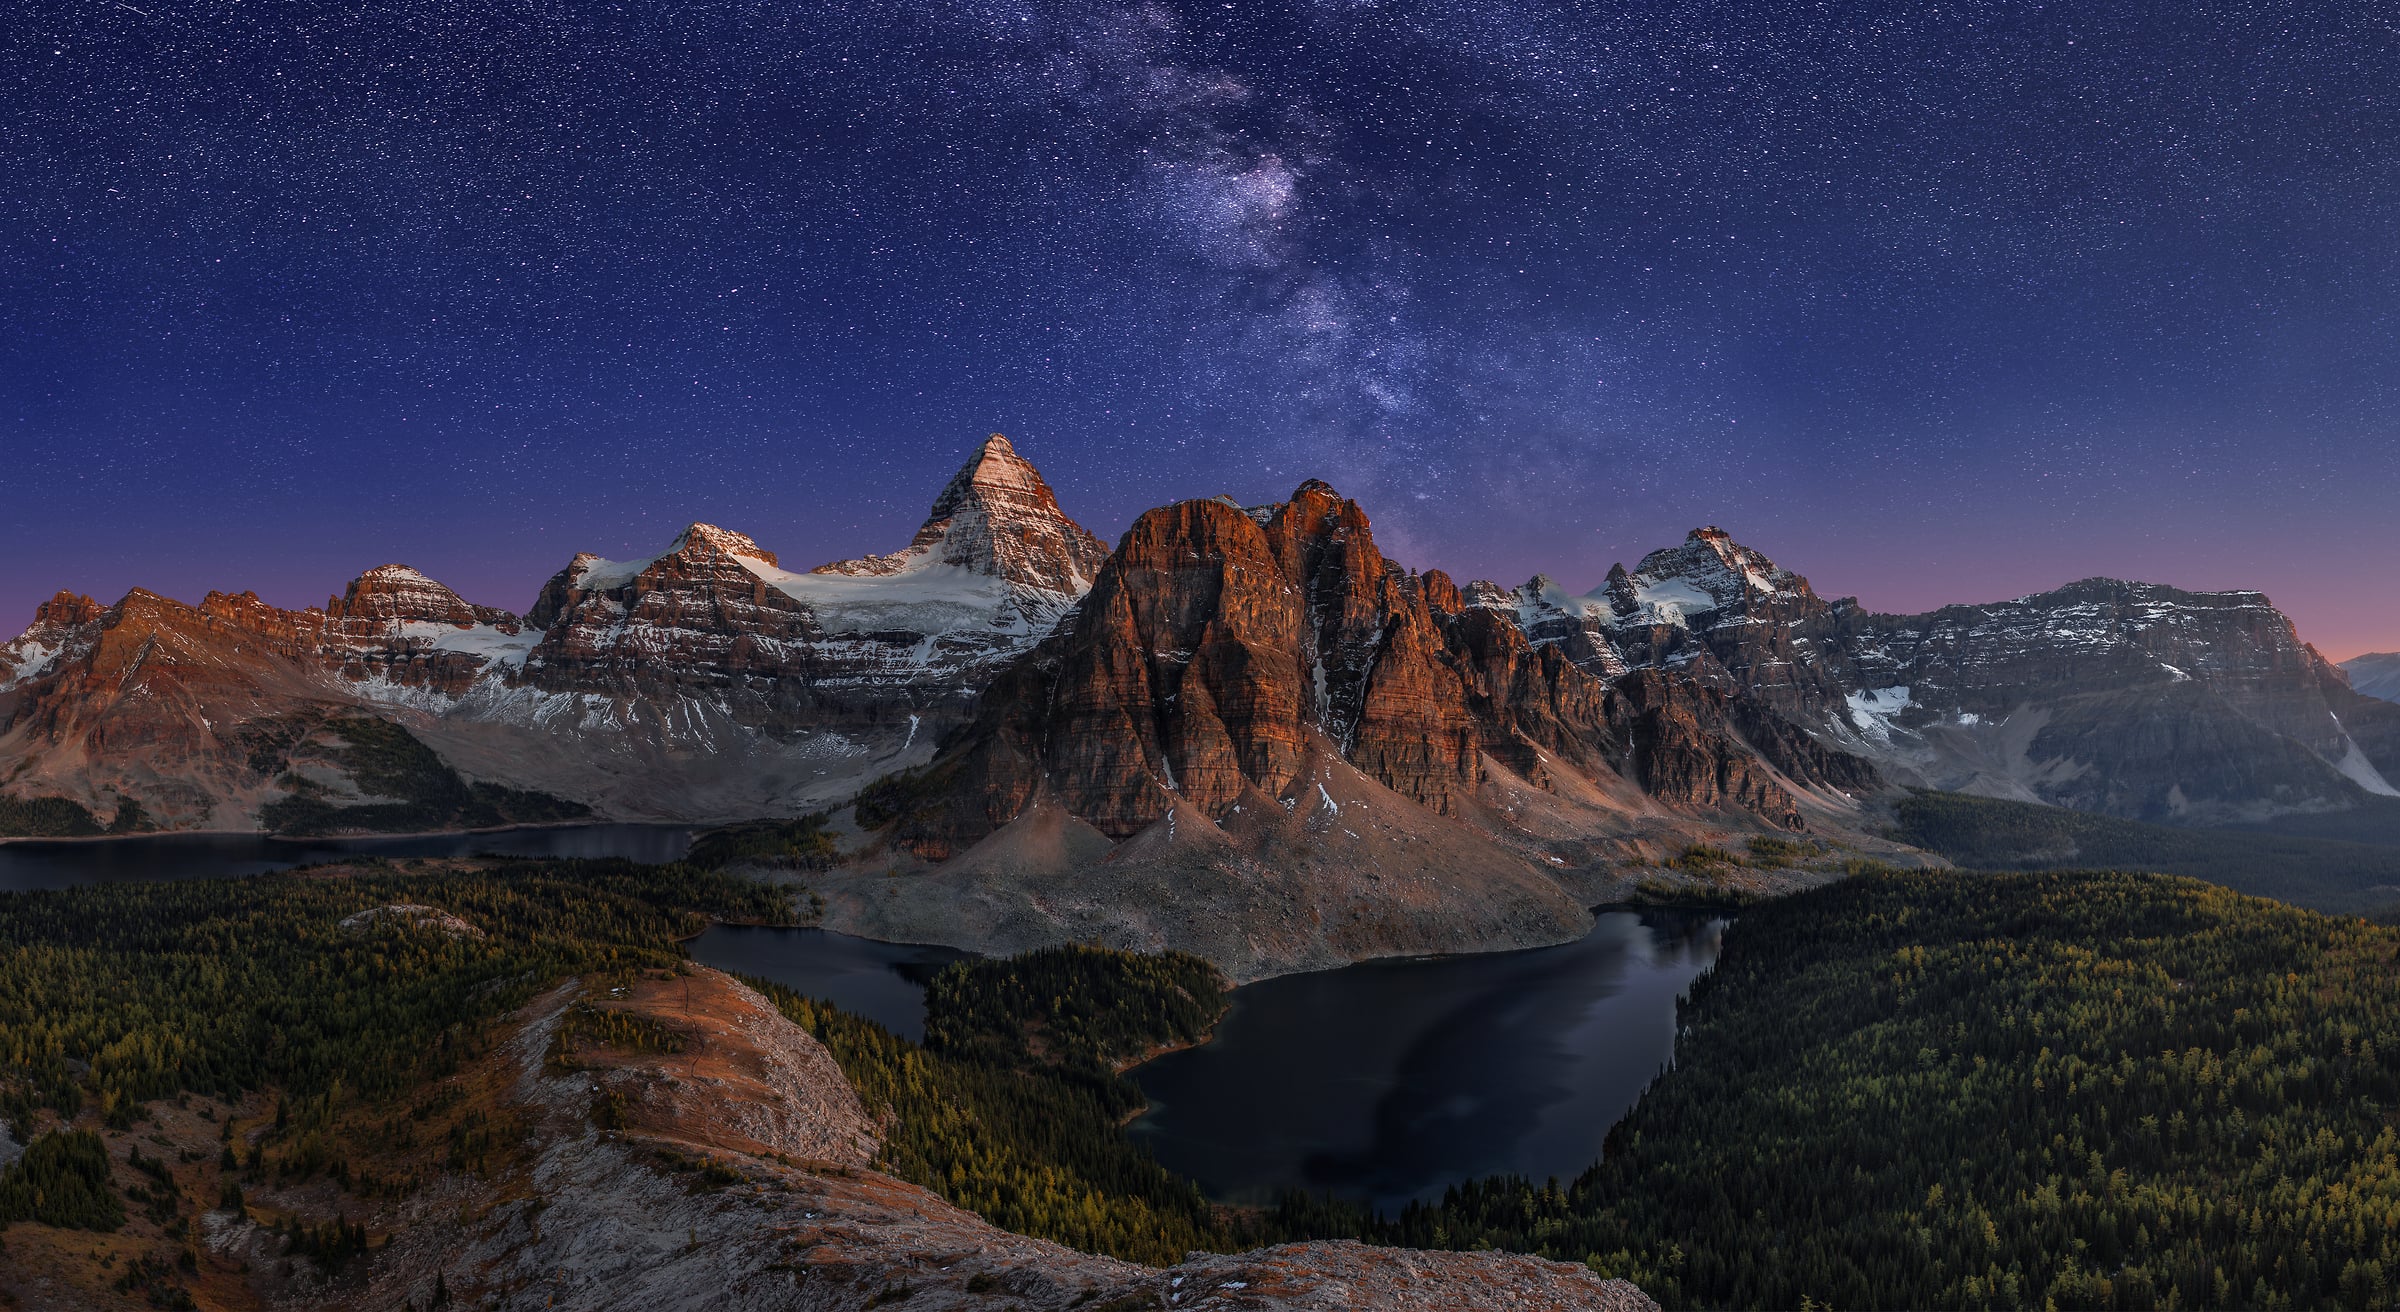 630 megapixels! A very high resolution, large-format VAST photo print of mountains, lakes, the milky way, stars, and Mount Assiniboine; fine art landscape photo created by Chris Collacott in Assiniboine Provinical Park, British Columbia, Canada.